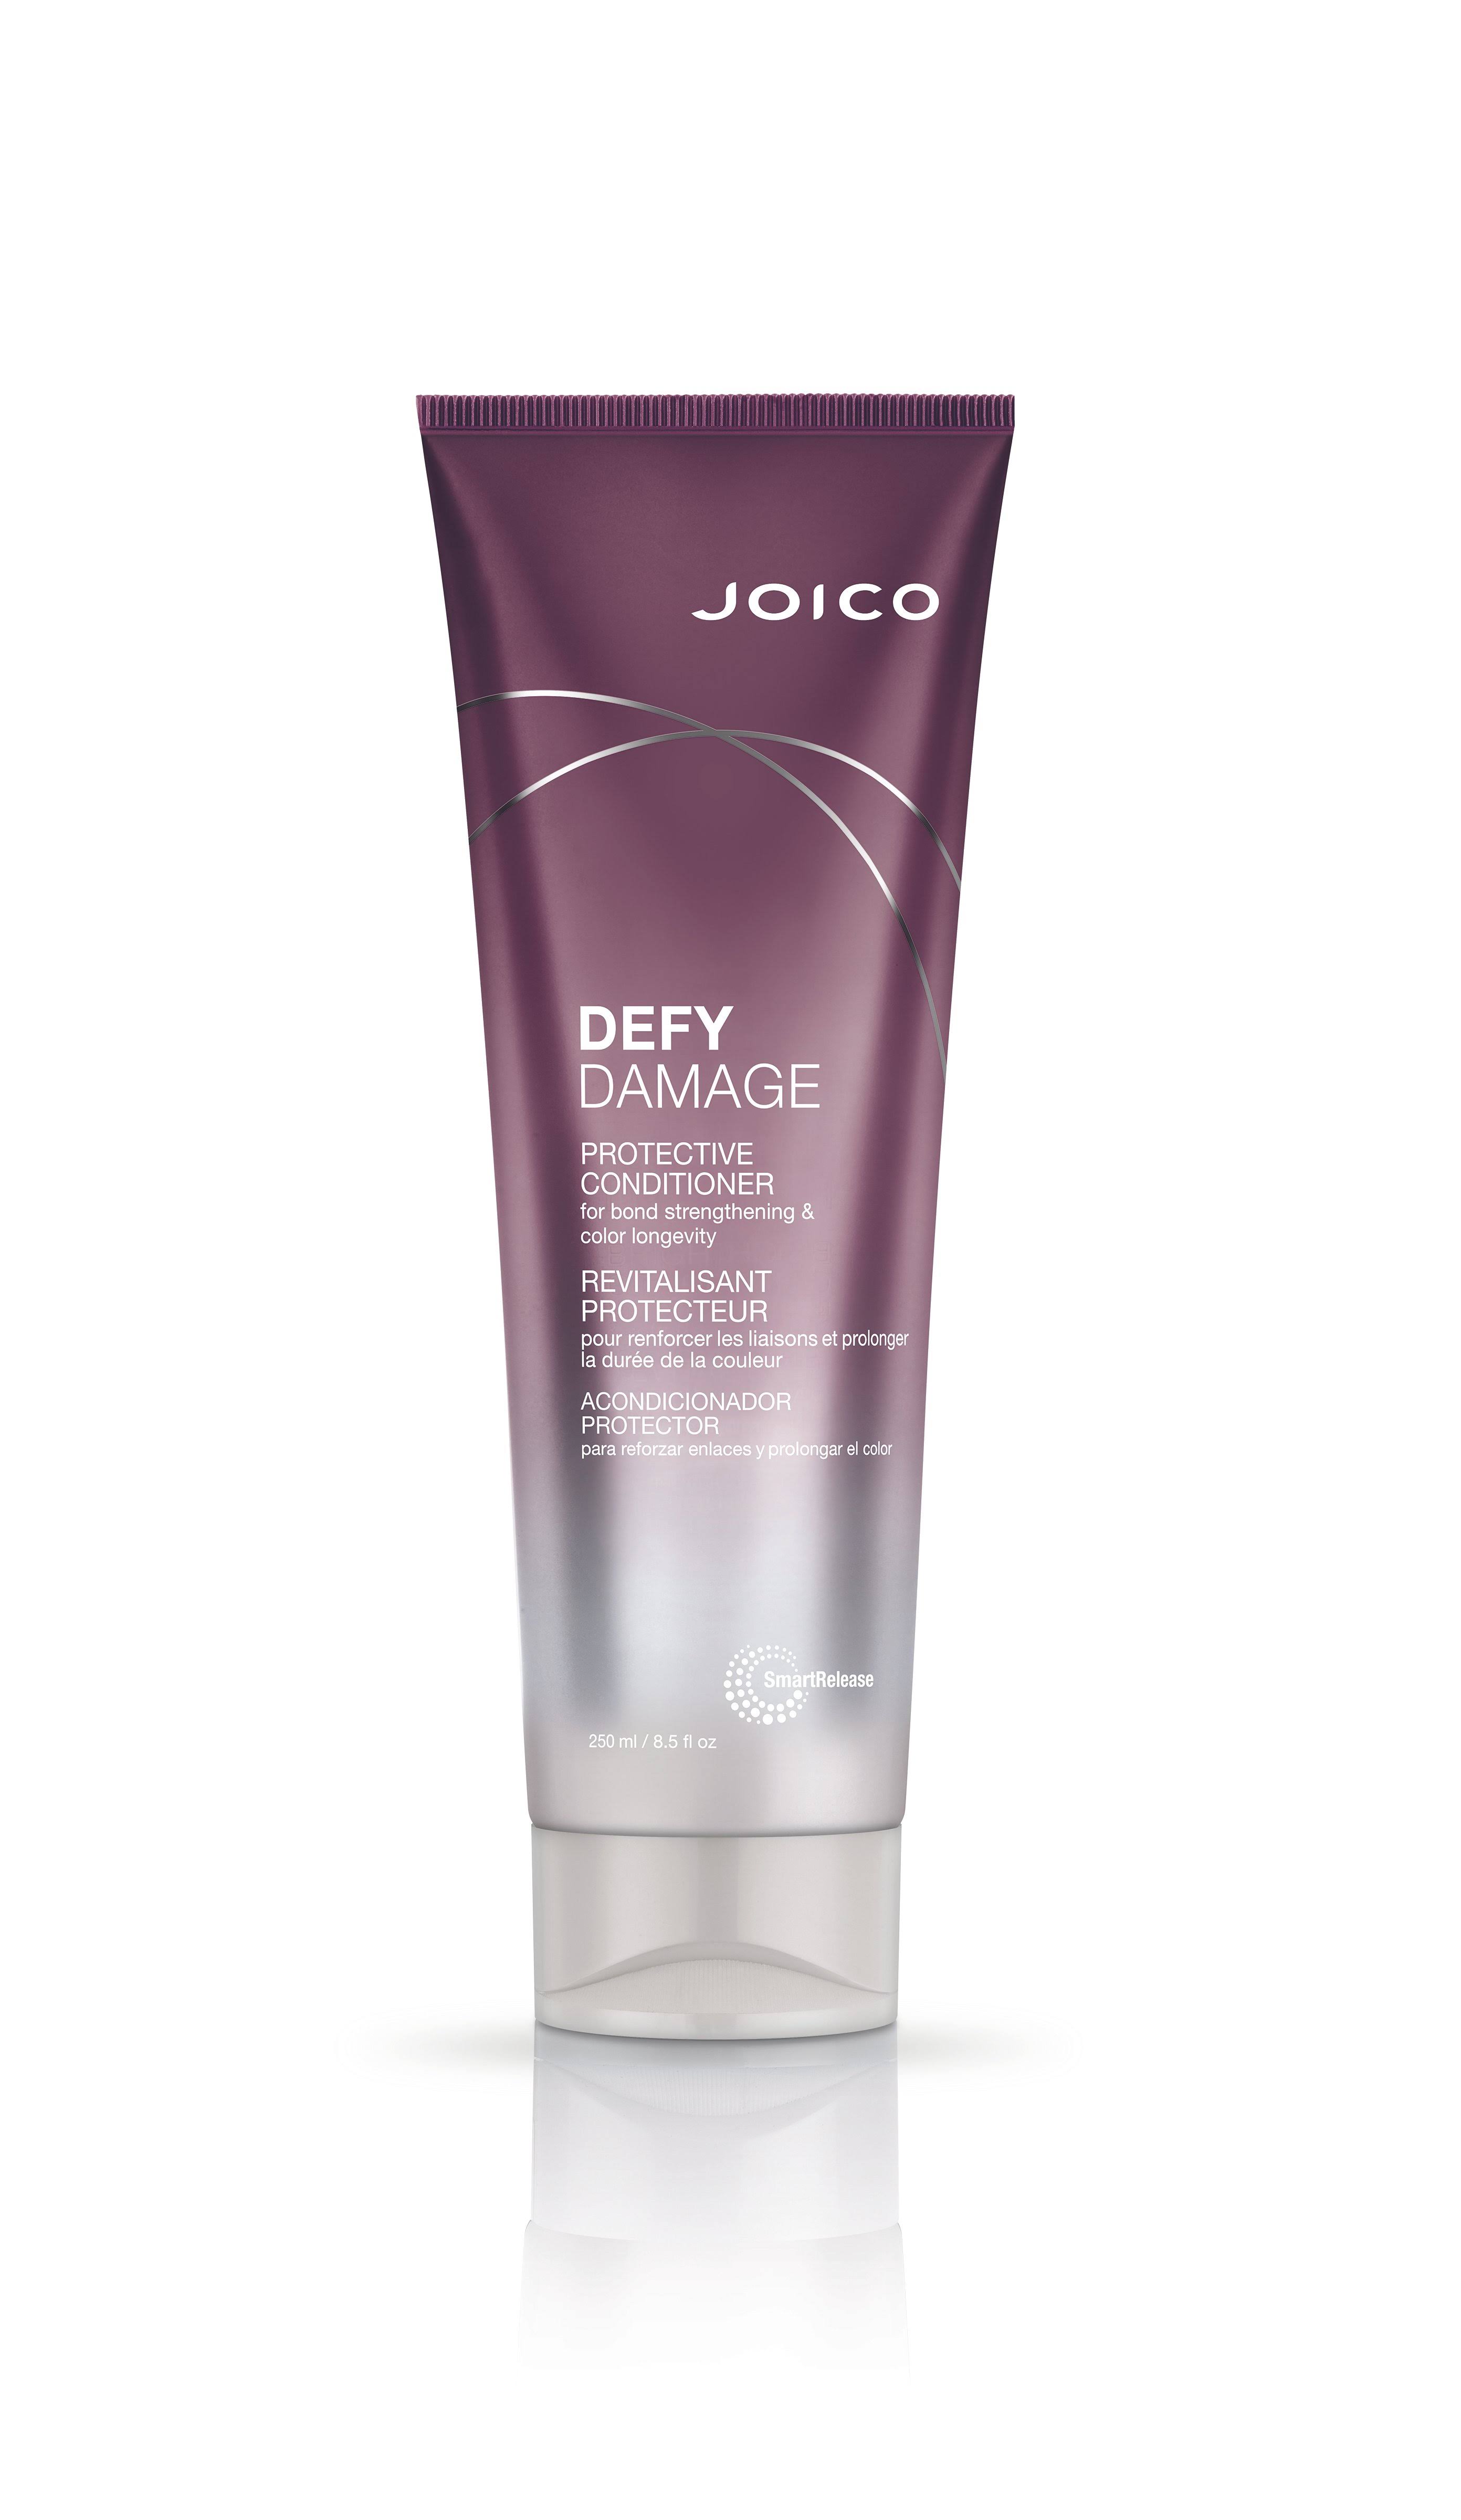 Joico Defy Damage Protective Conditioner 250.0 mL